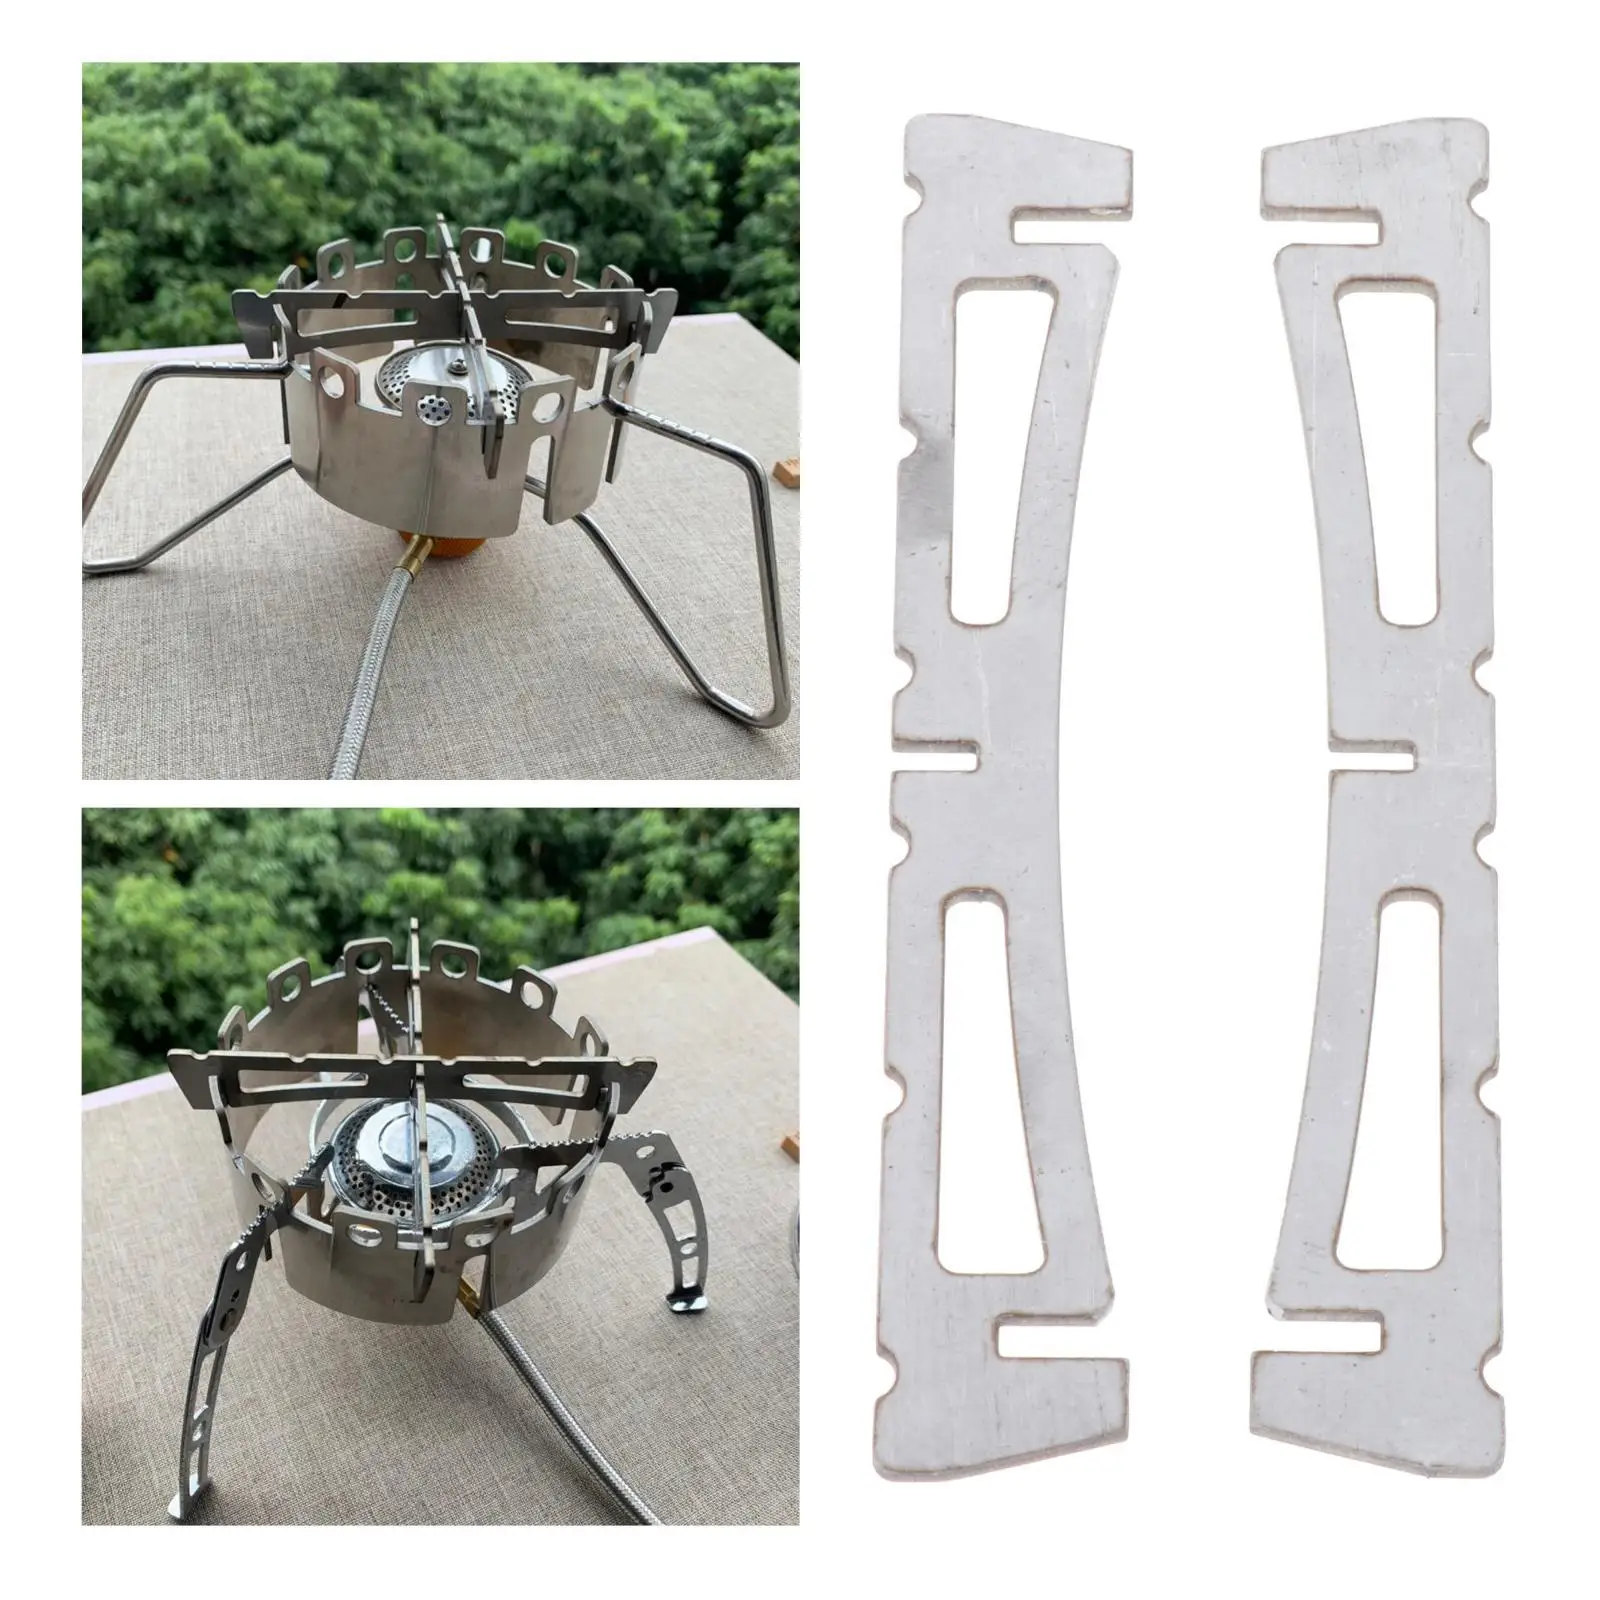  Stove  Stand Foldable  Support Stand Holder for Hiking Camping